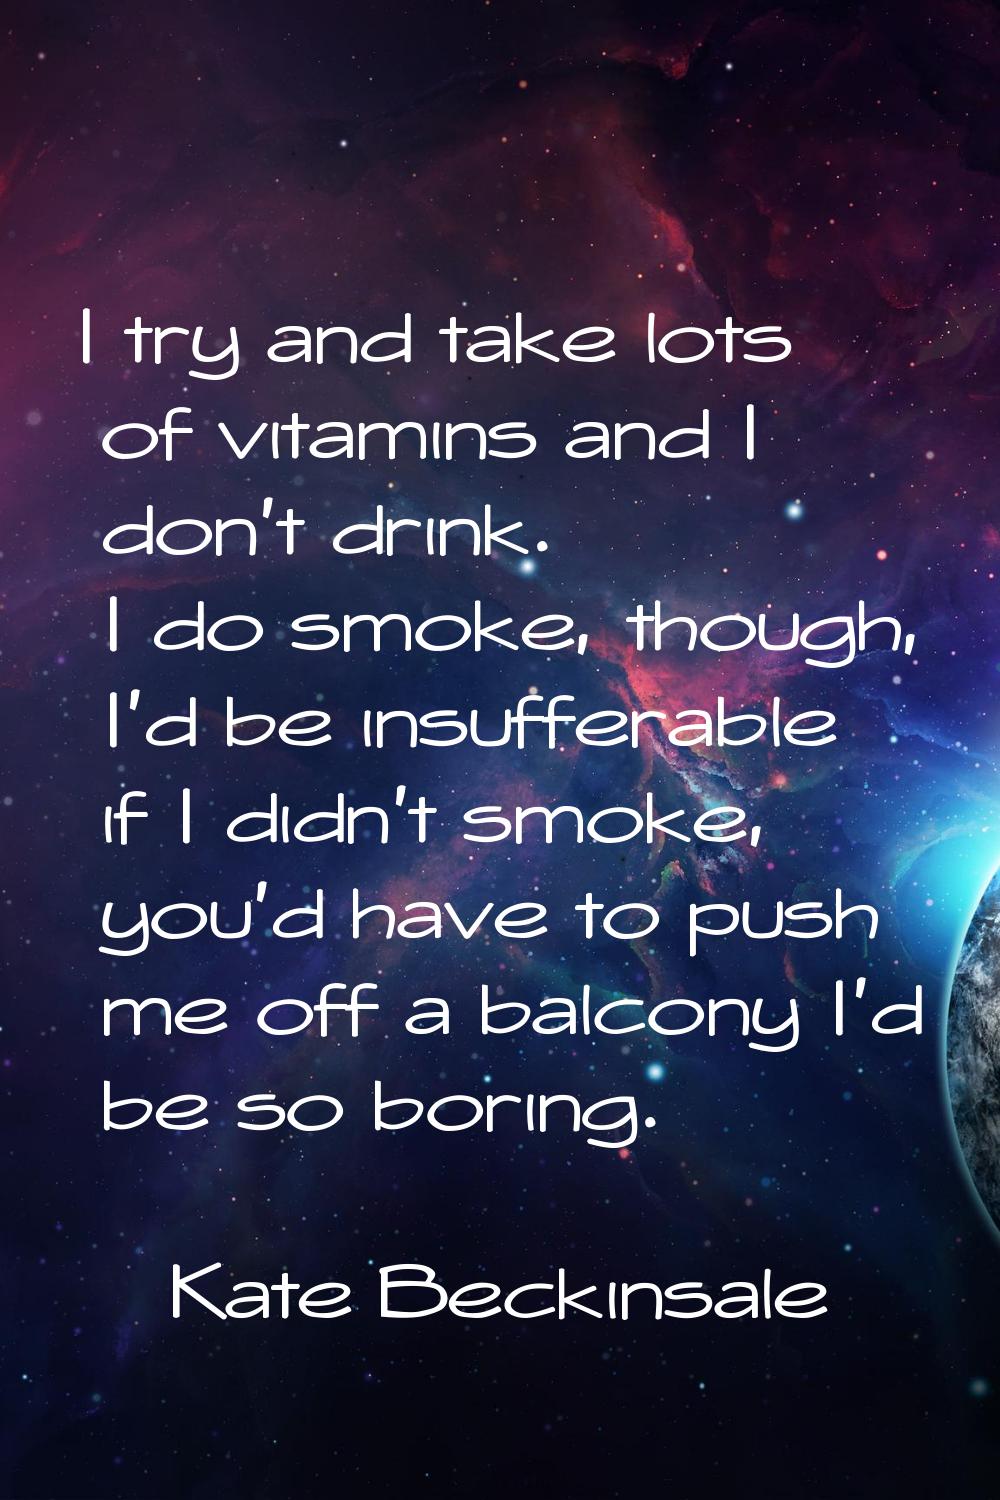 I try and take lots of vitamins and I don't drink. I do smoke, though, I'd be insufferable if I did